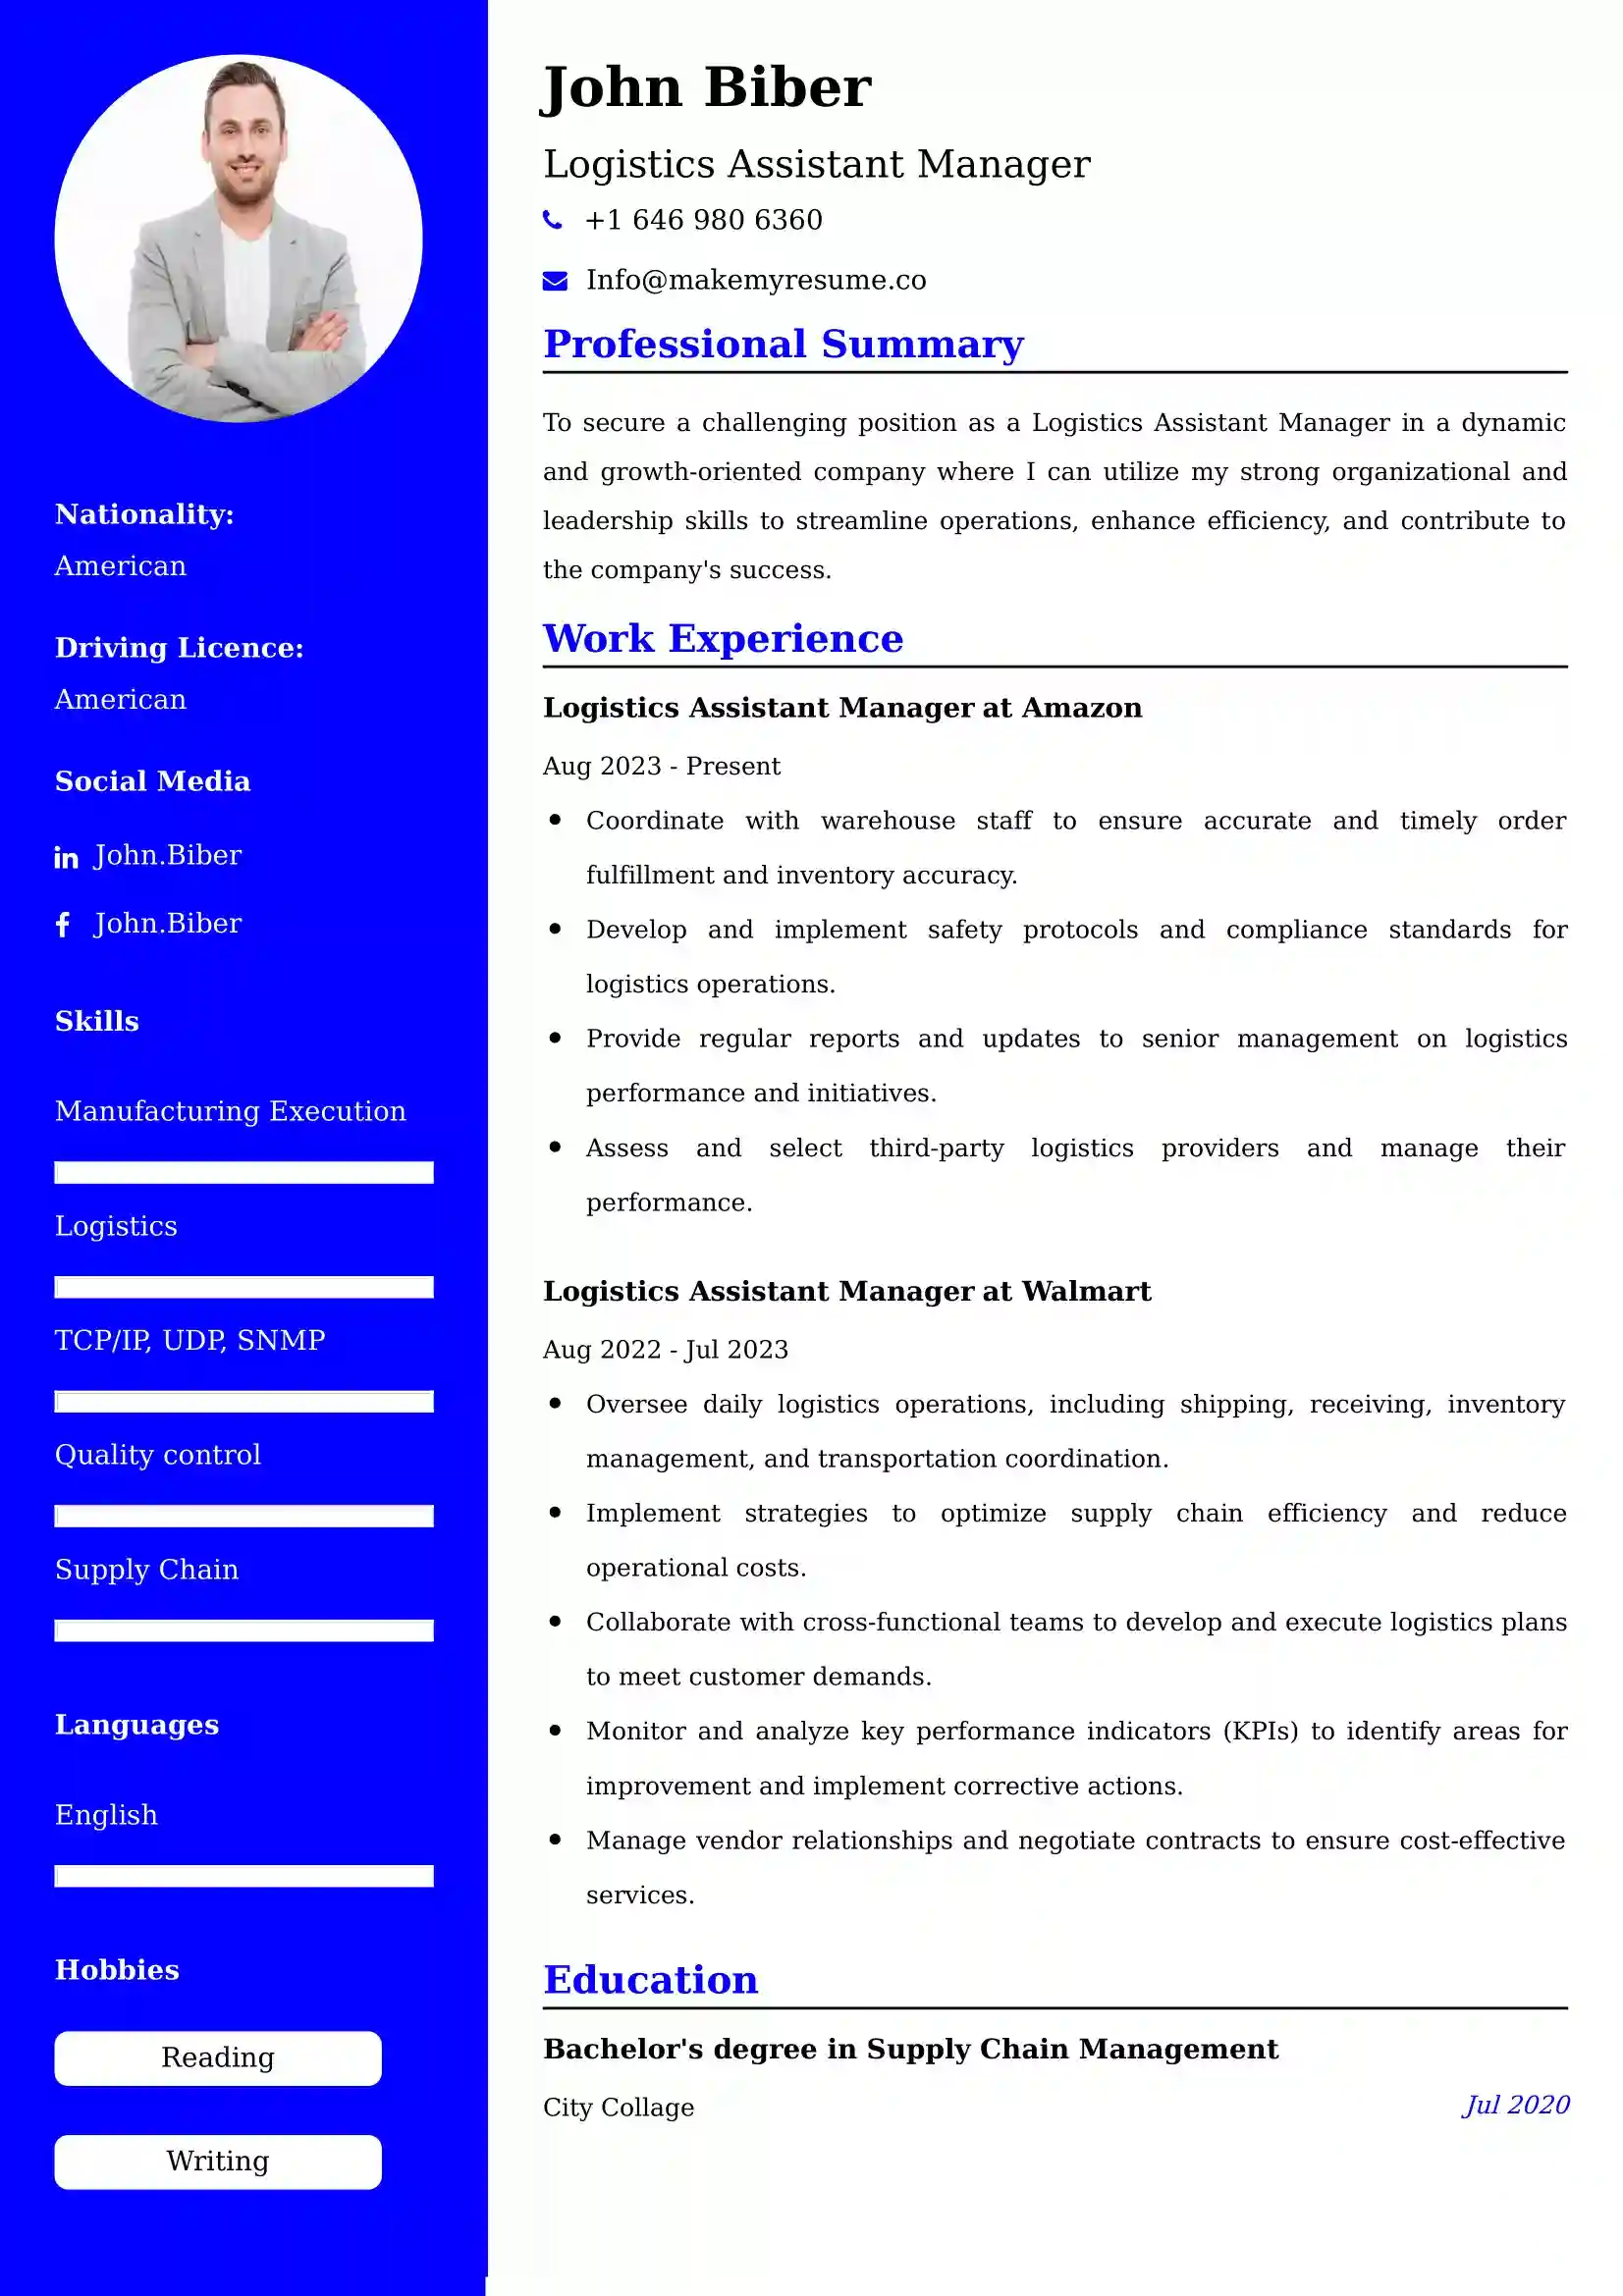 Logistics Assistant Manager Resume Examples - UK Format, Latest Template.